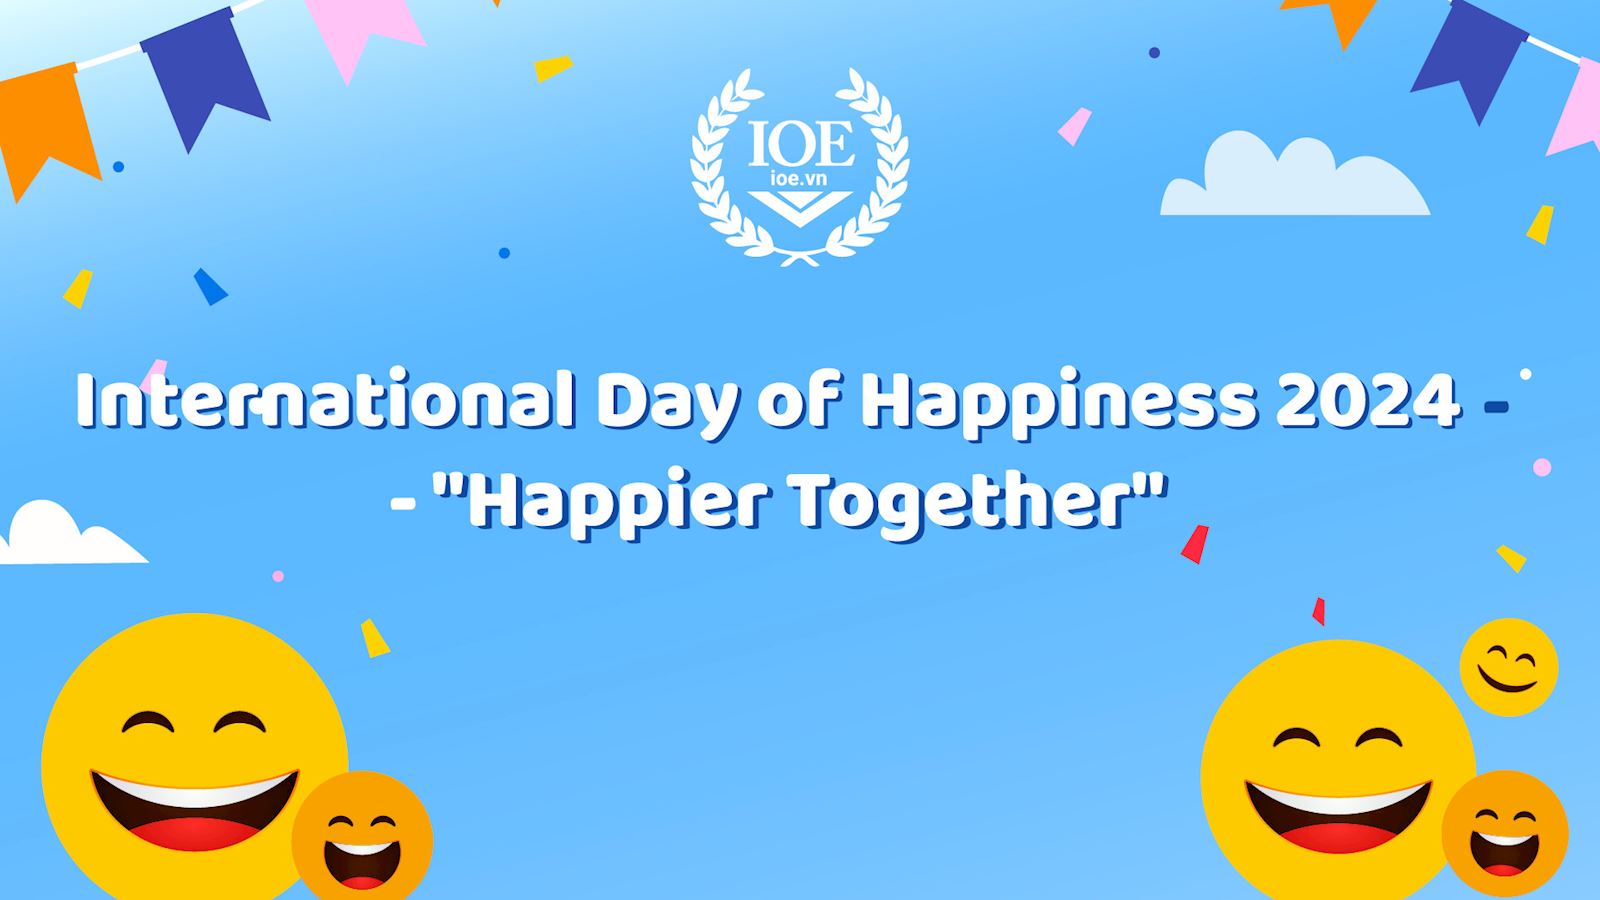 International Day of Happiness 2024 - Happier Together